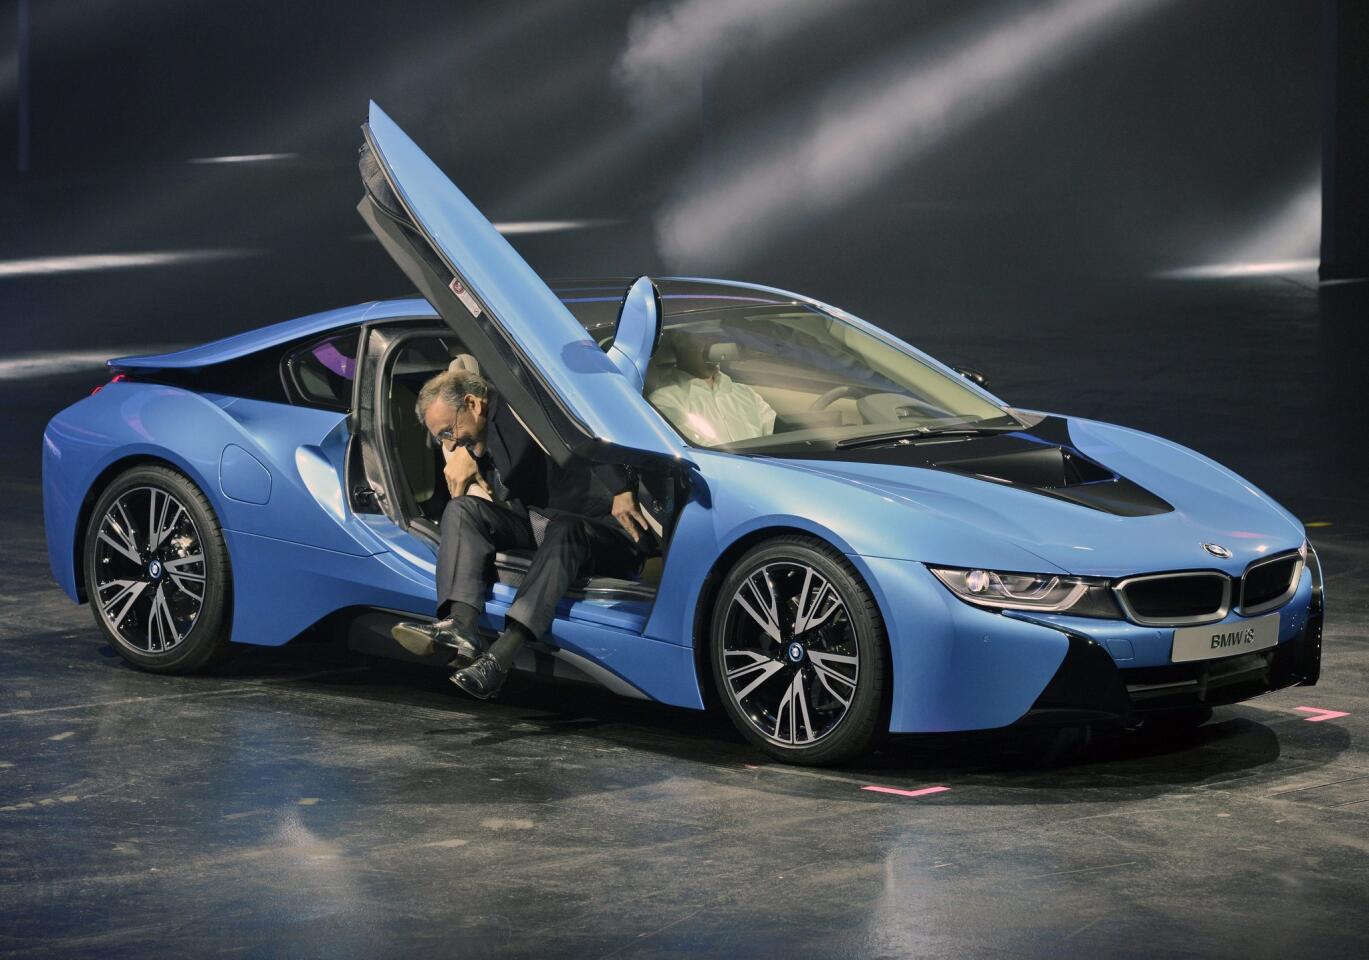 Chairman of BMW, Norbert Reithofer, climbs out of a BMW i8 Hybrid sports car during the press day of the Frankfurt Motor Show (IAA) in Frankfurt, Germany.